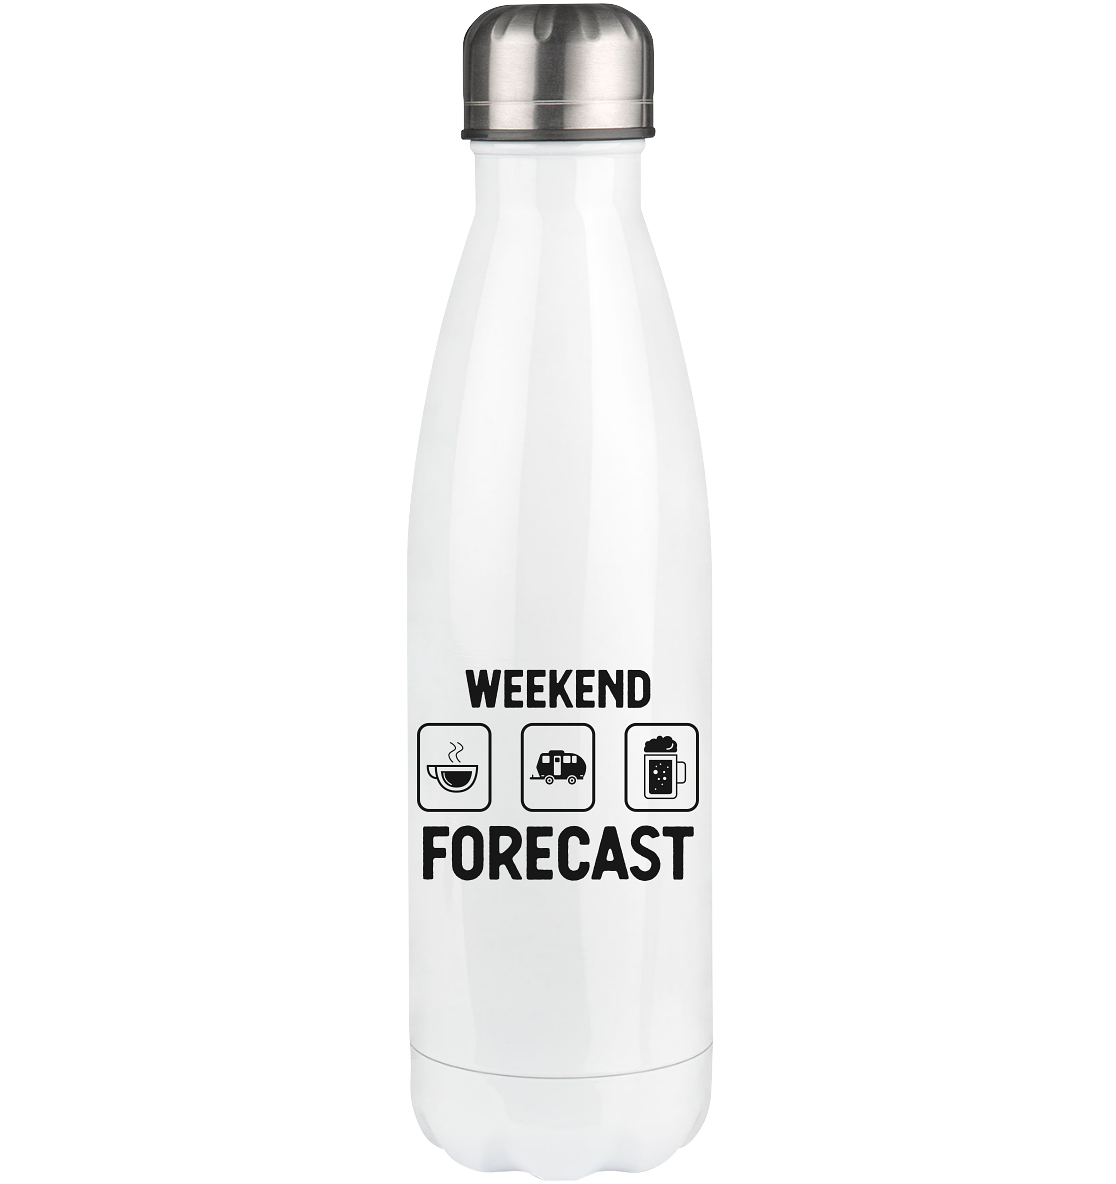 Weekend Forecast 2 - Edelstahl Thermosflasche camping 500ml